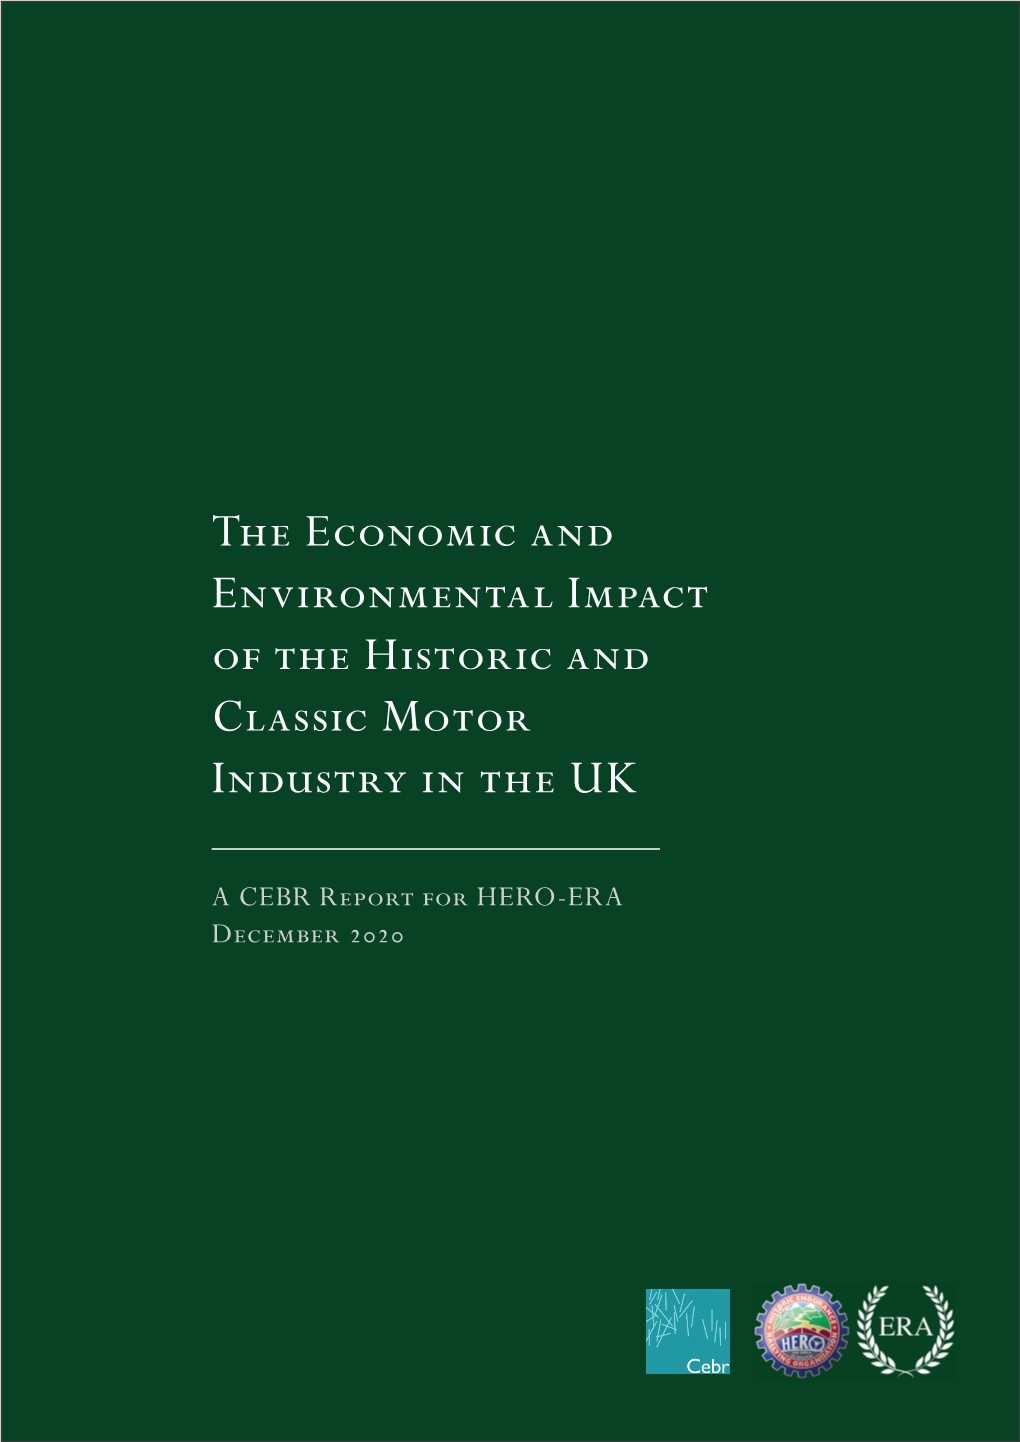 The Economic and Environmental Impact of the Historic and Classic Motor Industry in the UK